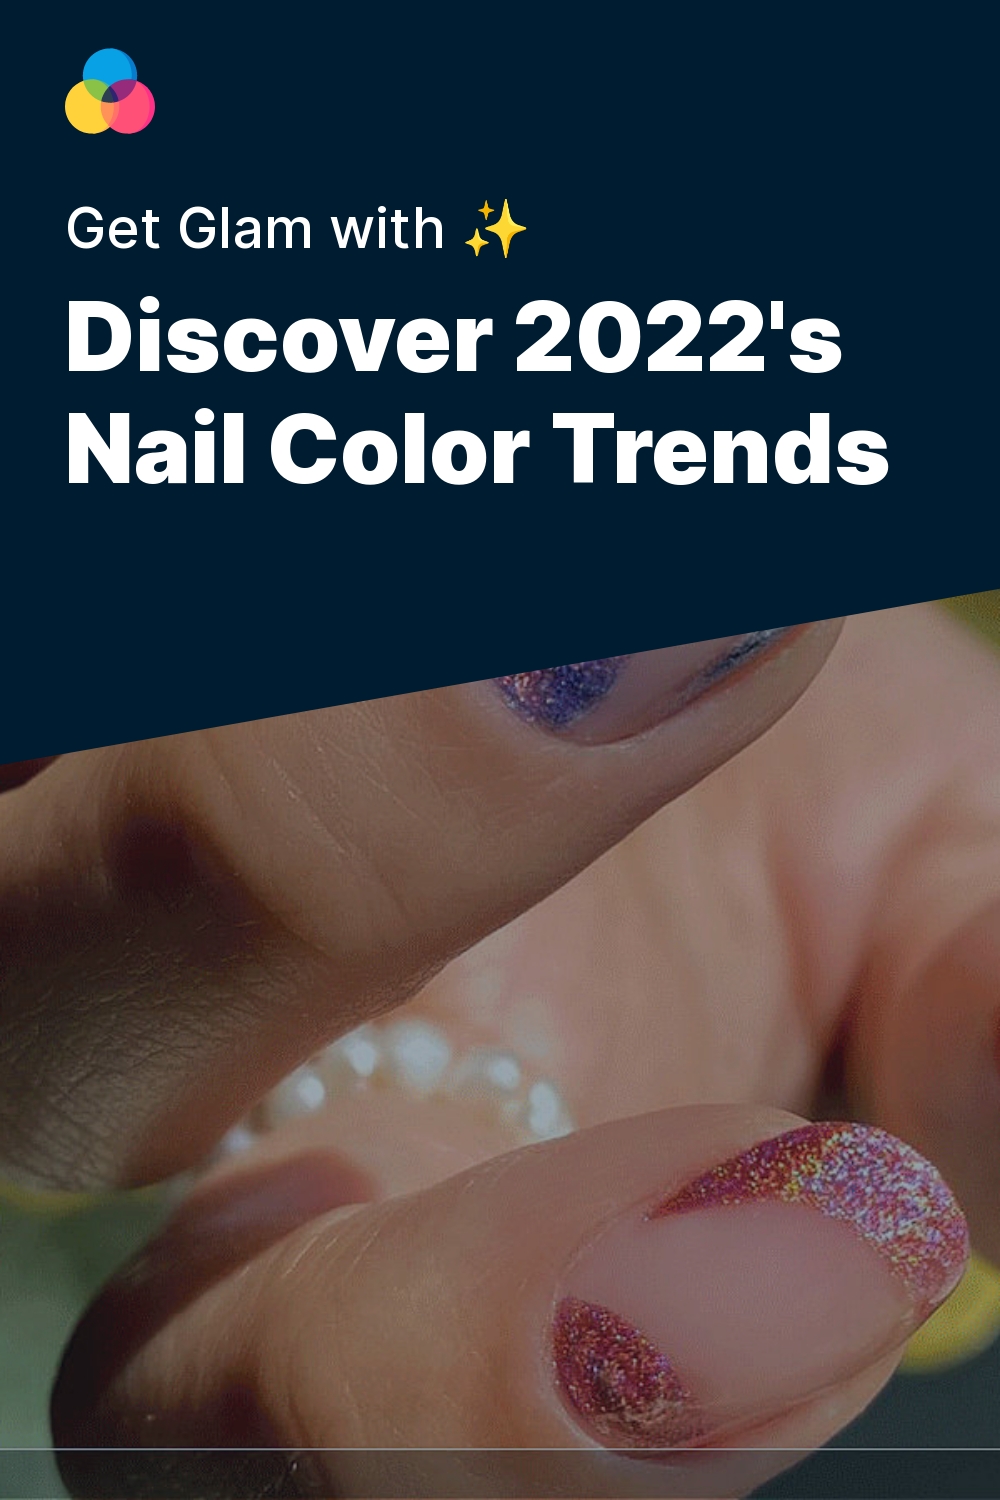 Discover 2022's Nail Color Trends - Get Glam with ✨